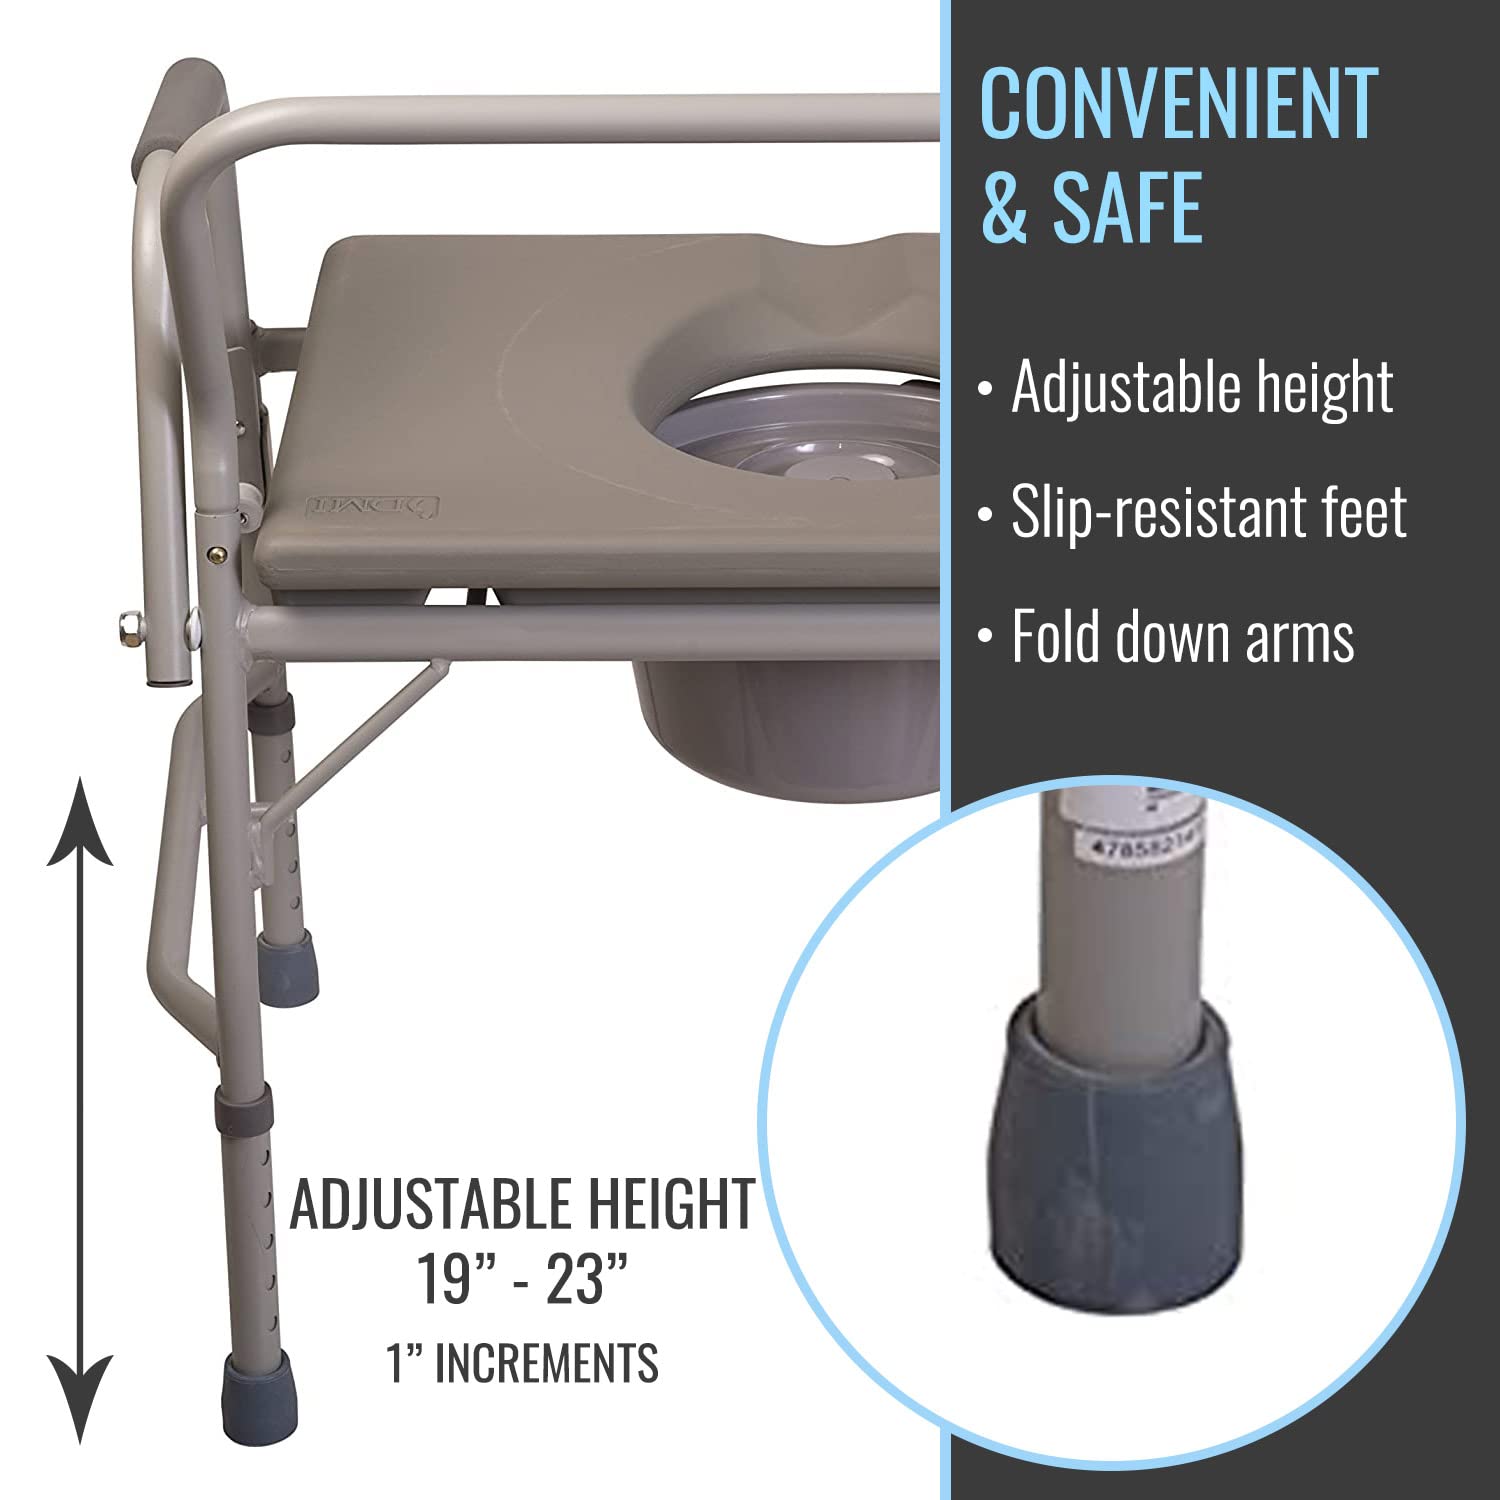 DMI Bedside Commode, Portable Toilet, Commode Chair, Raised Toilet Seat with Handles, Holds up to 500 Pounds with Included 7 qt Commode Bucket, Adjustable from 19-23 Inches, Extra Wide Commode